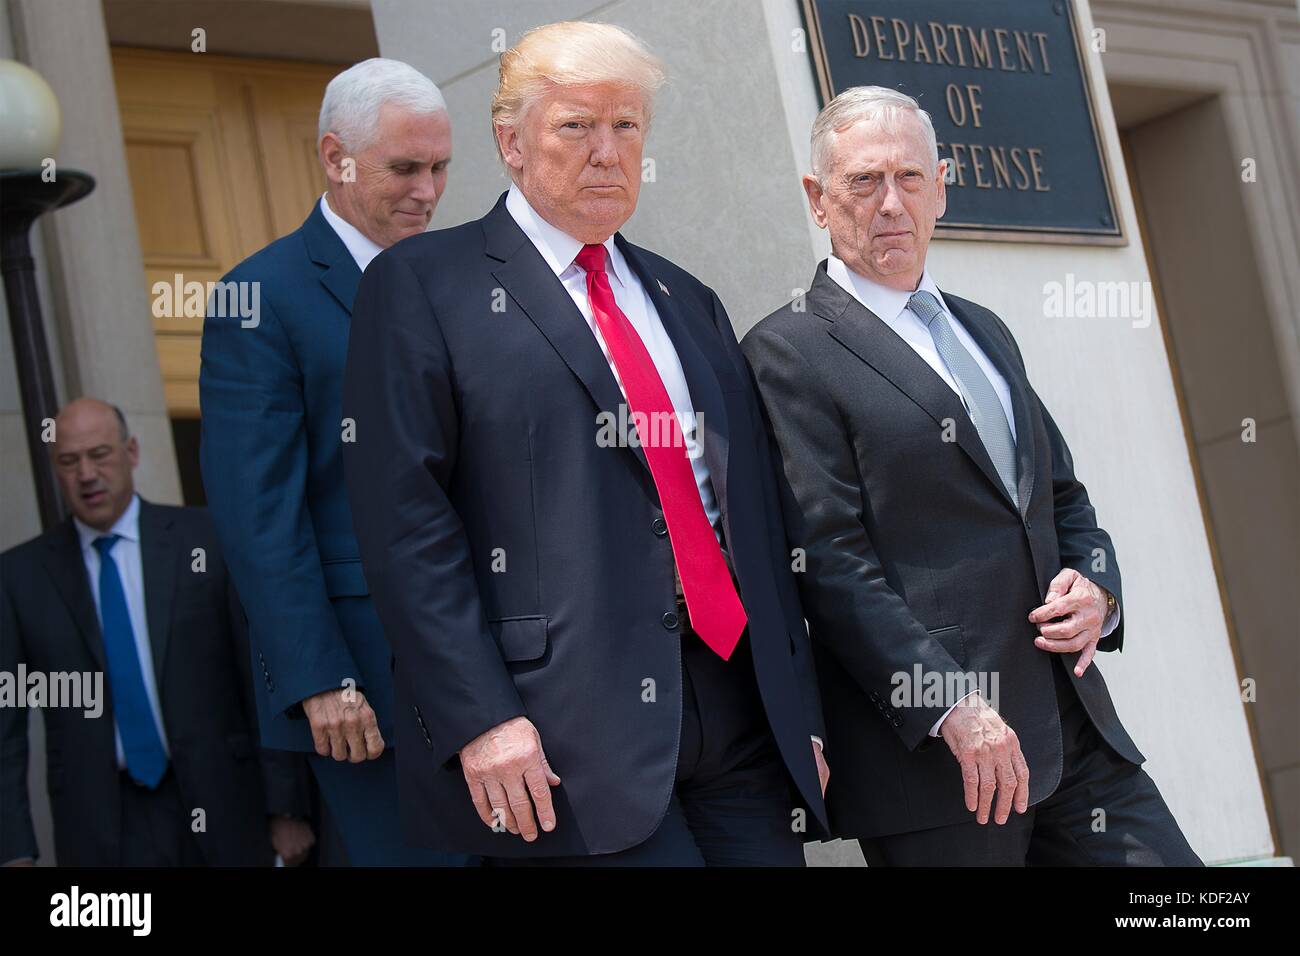 U.S. Vice President Mike Pence, U.S. President Donald Trump and U.S. Defense Secretary James Mattis leave the Pentagon after a meeting of the National Security Council July 20, 2017 in Washington, DC.   (photo by Dominique A. Pineiro via Planetpix) Stock Photo